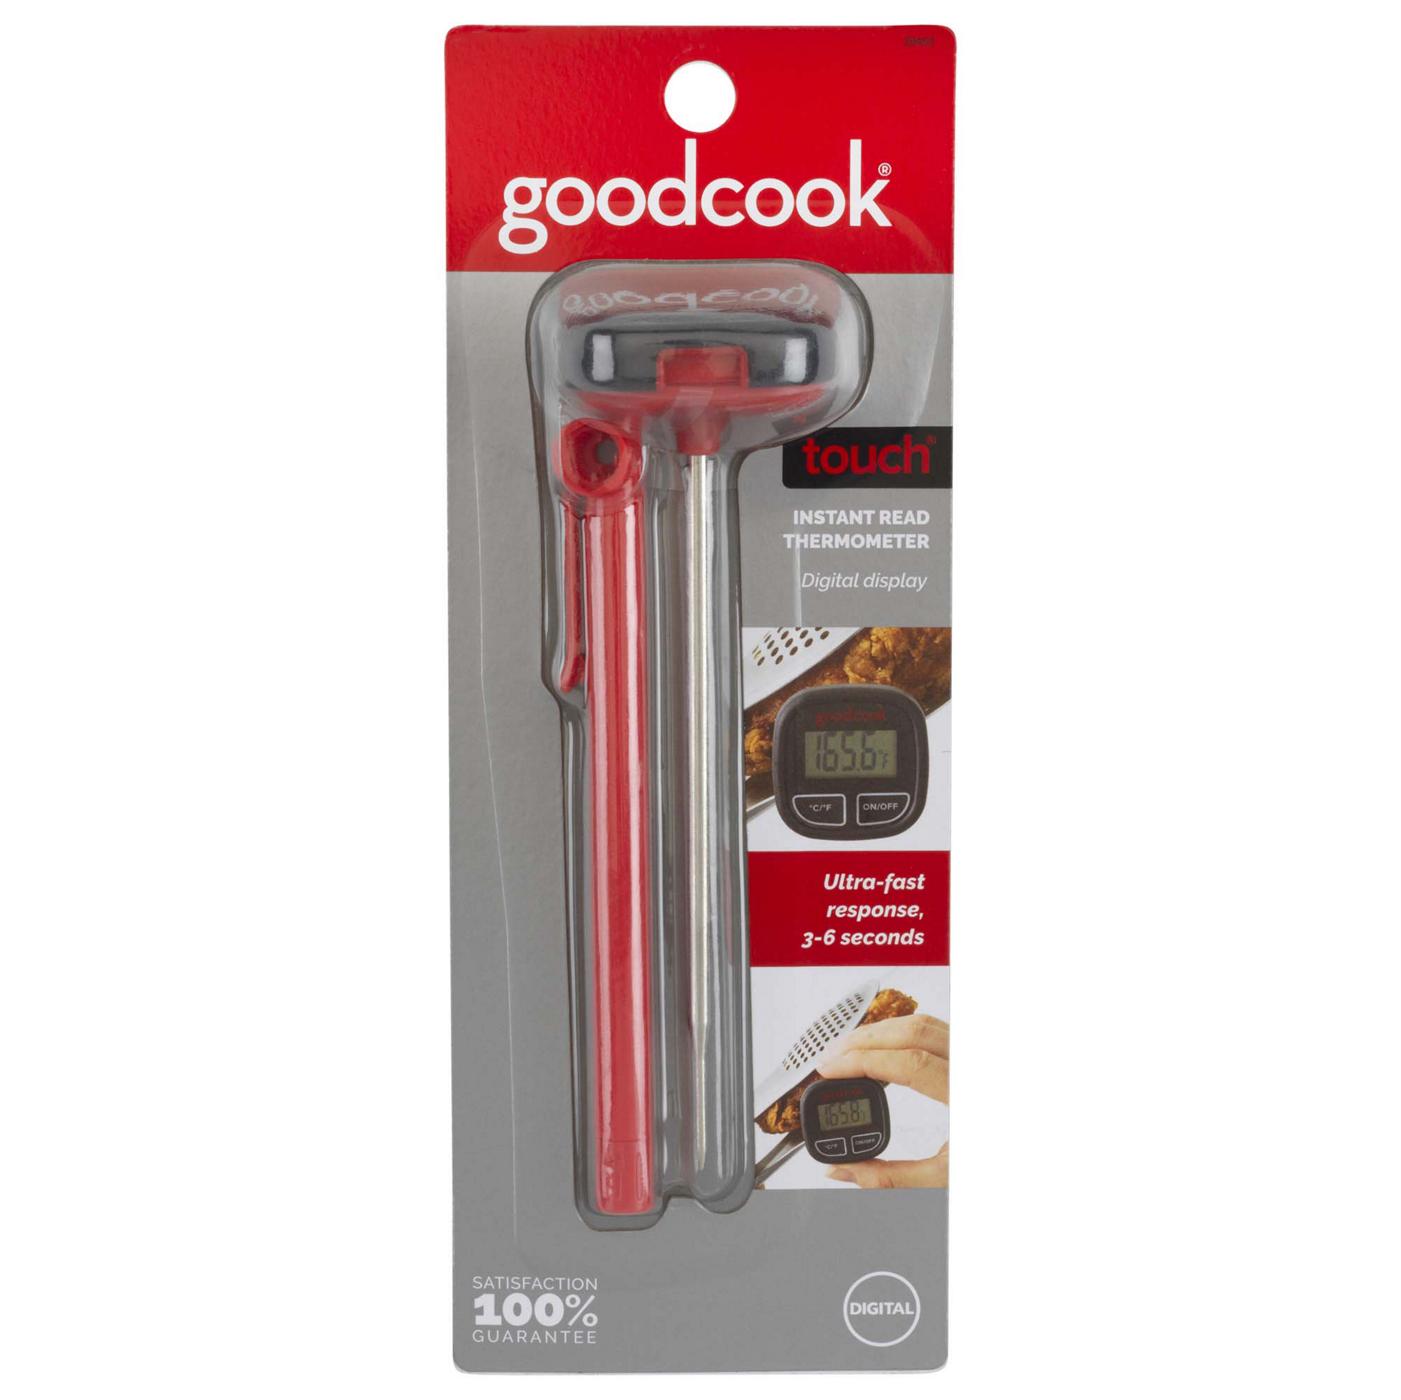 GoodCook Touch Digital Instant Read Thermometer; image 1 of 5